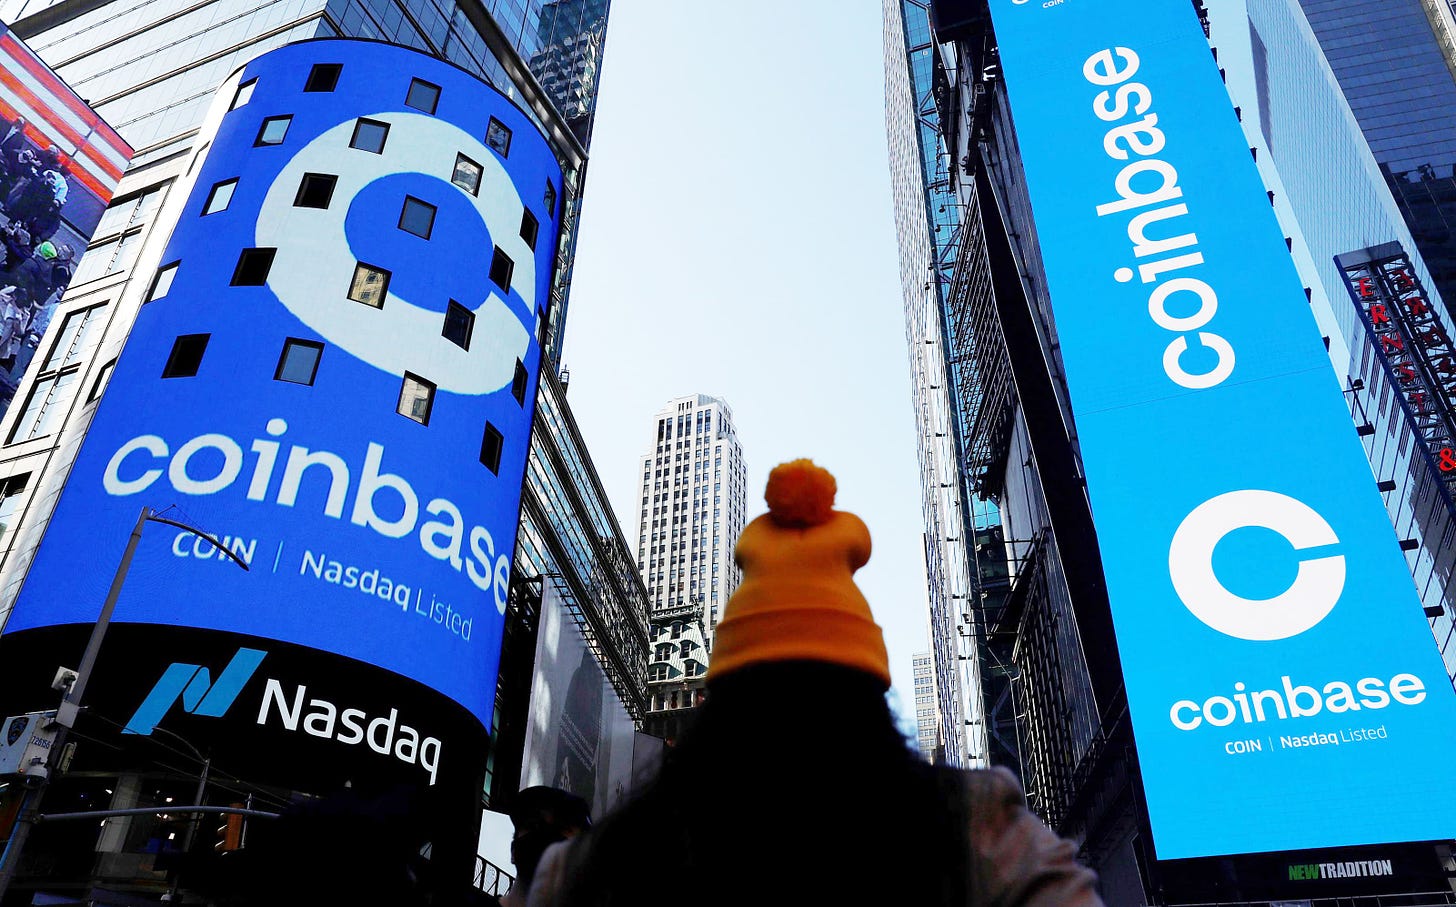 Coinbase stock debuts on Nasdaq in direct listing